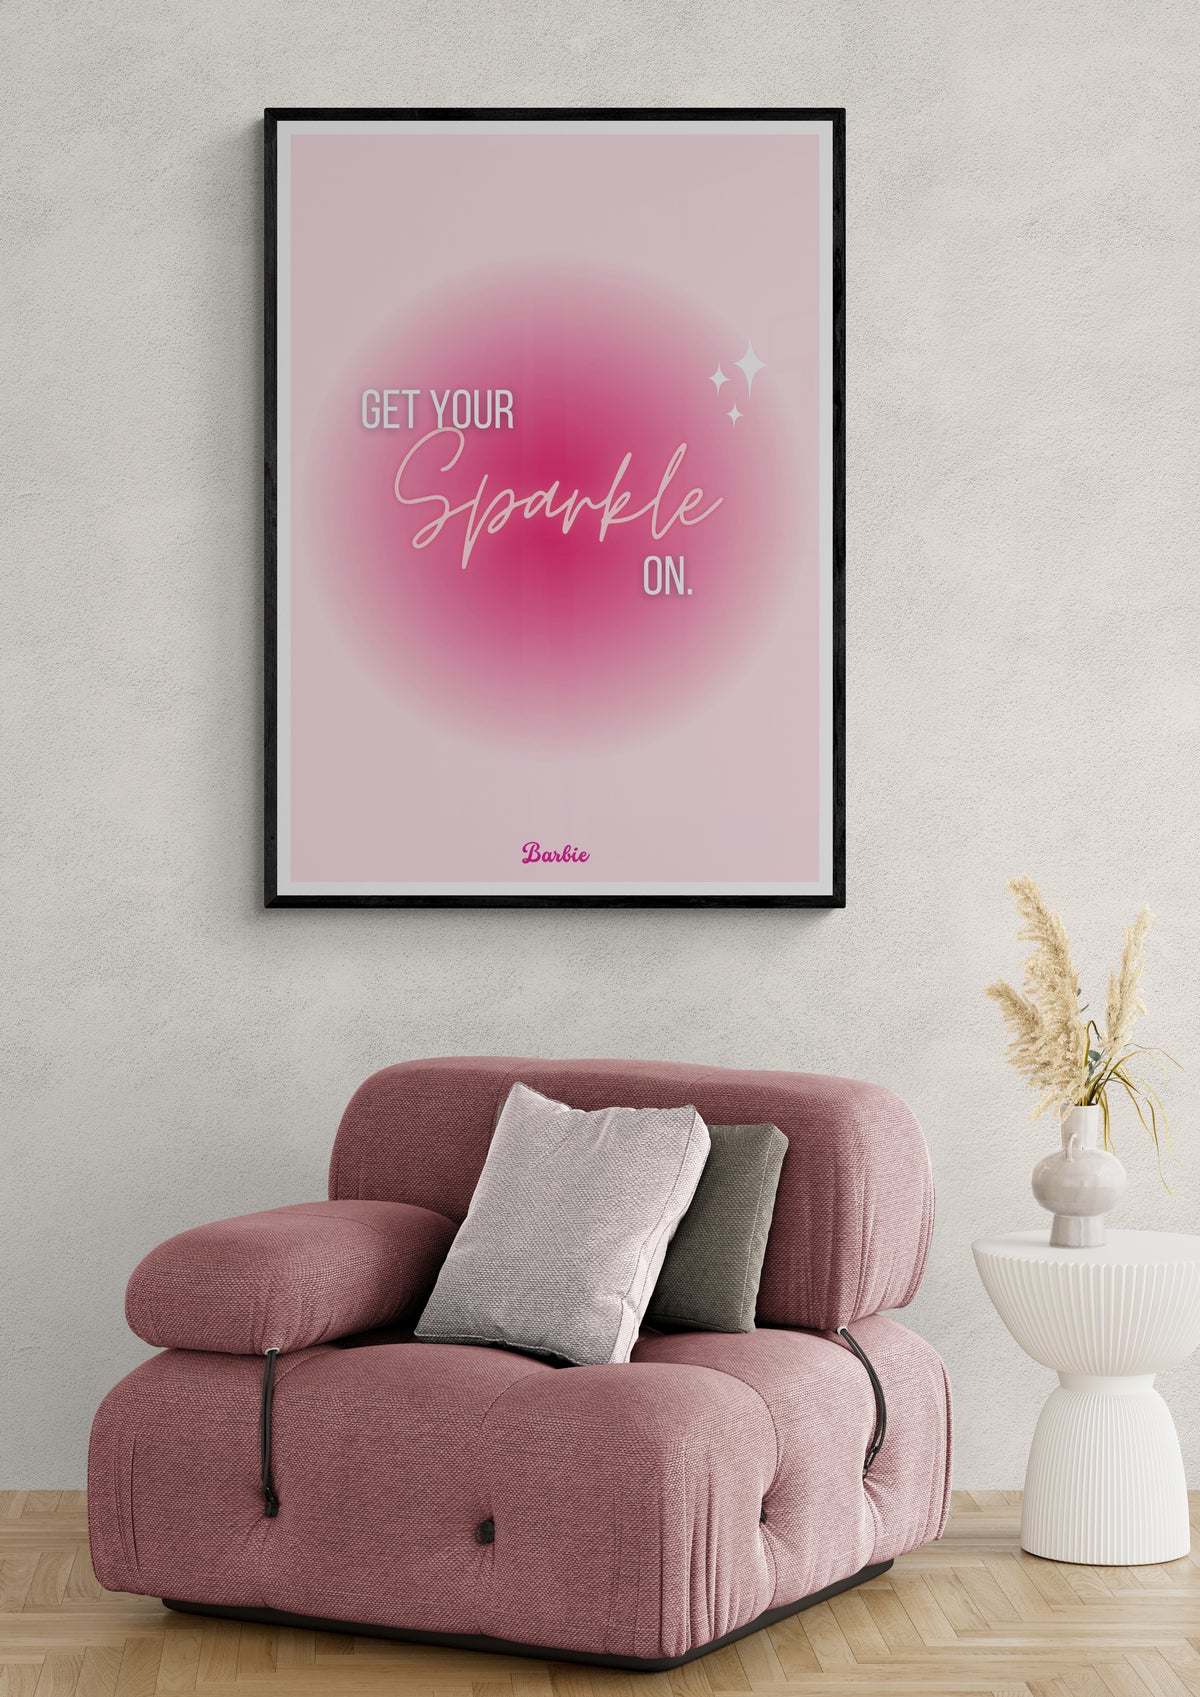 Get your sparkle on Poster